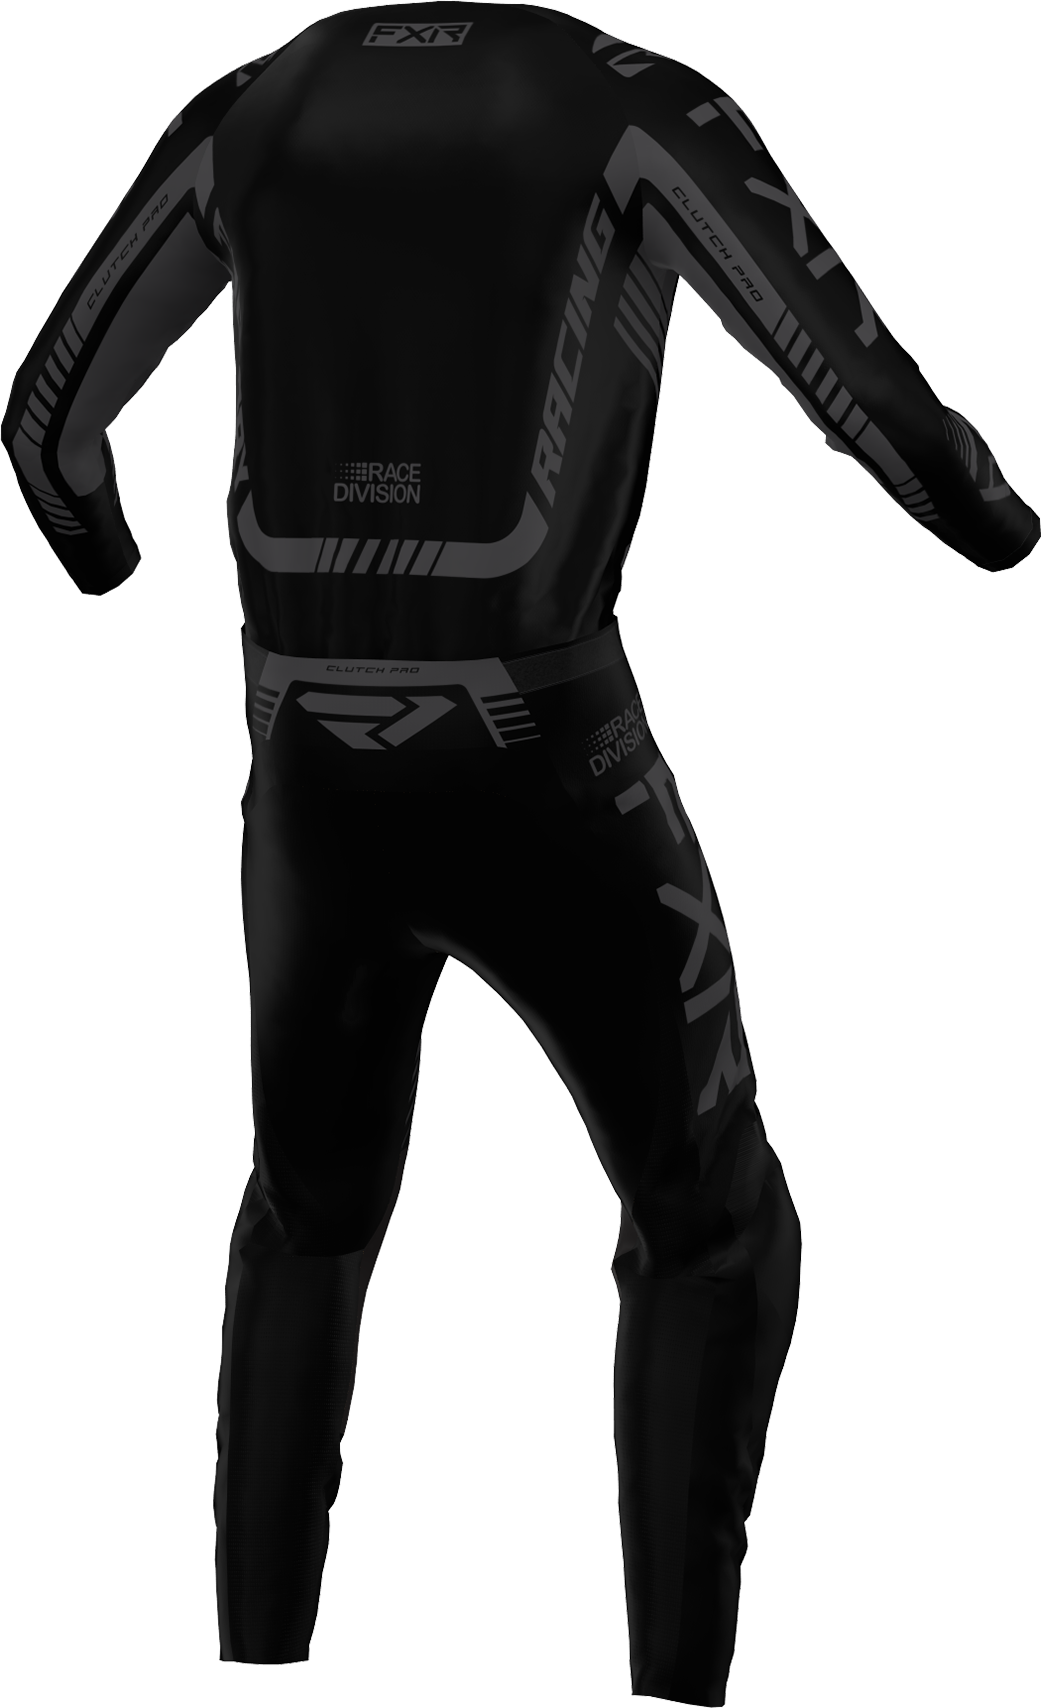 A 3D image of FXR's Clutch Pro MX Jersey and Pant in Black Ops colorway